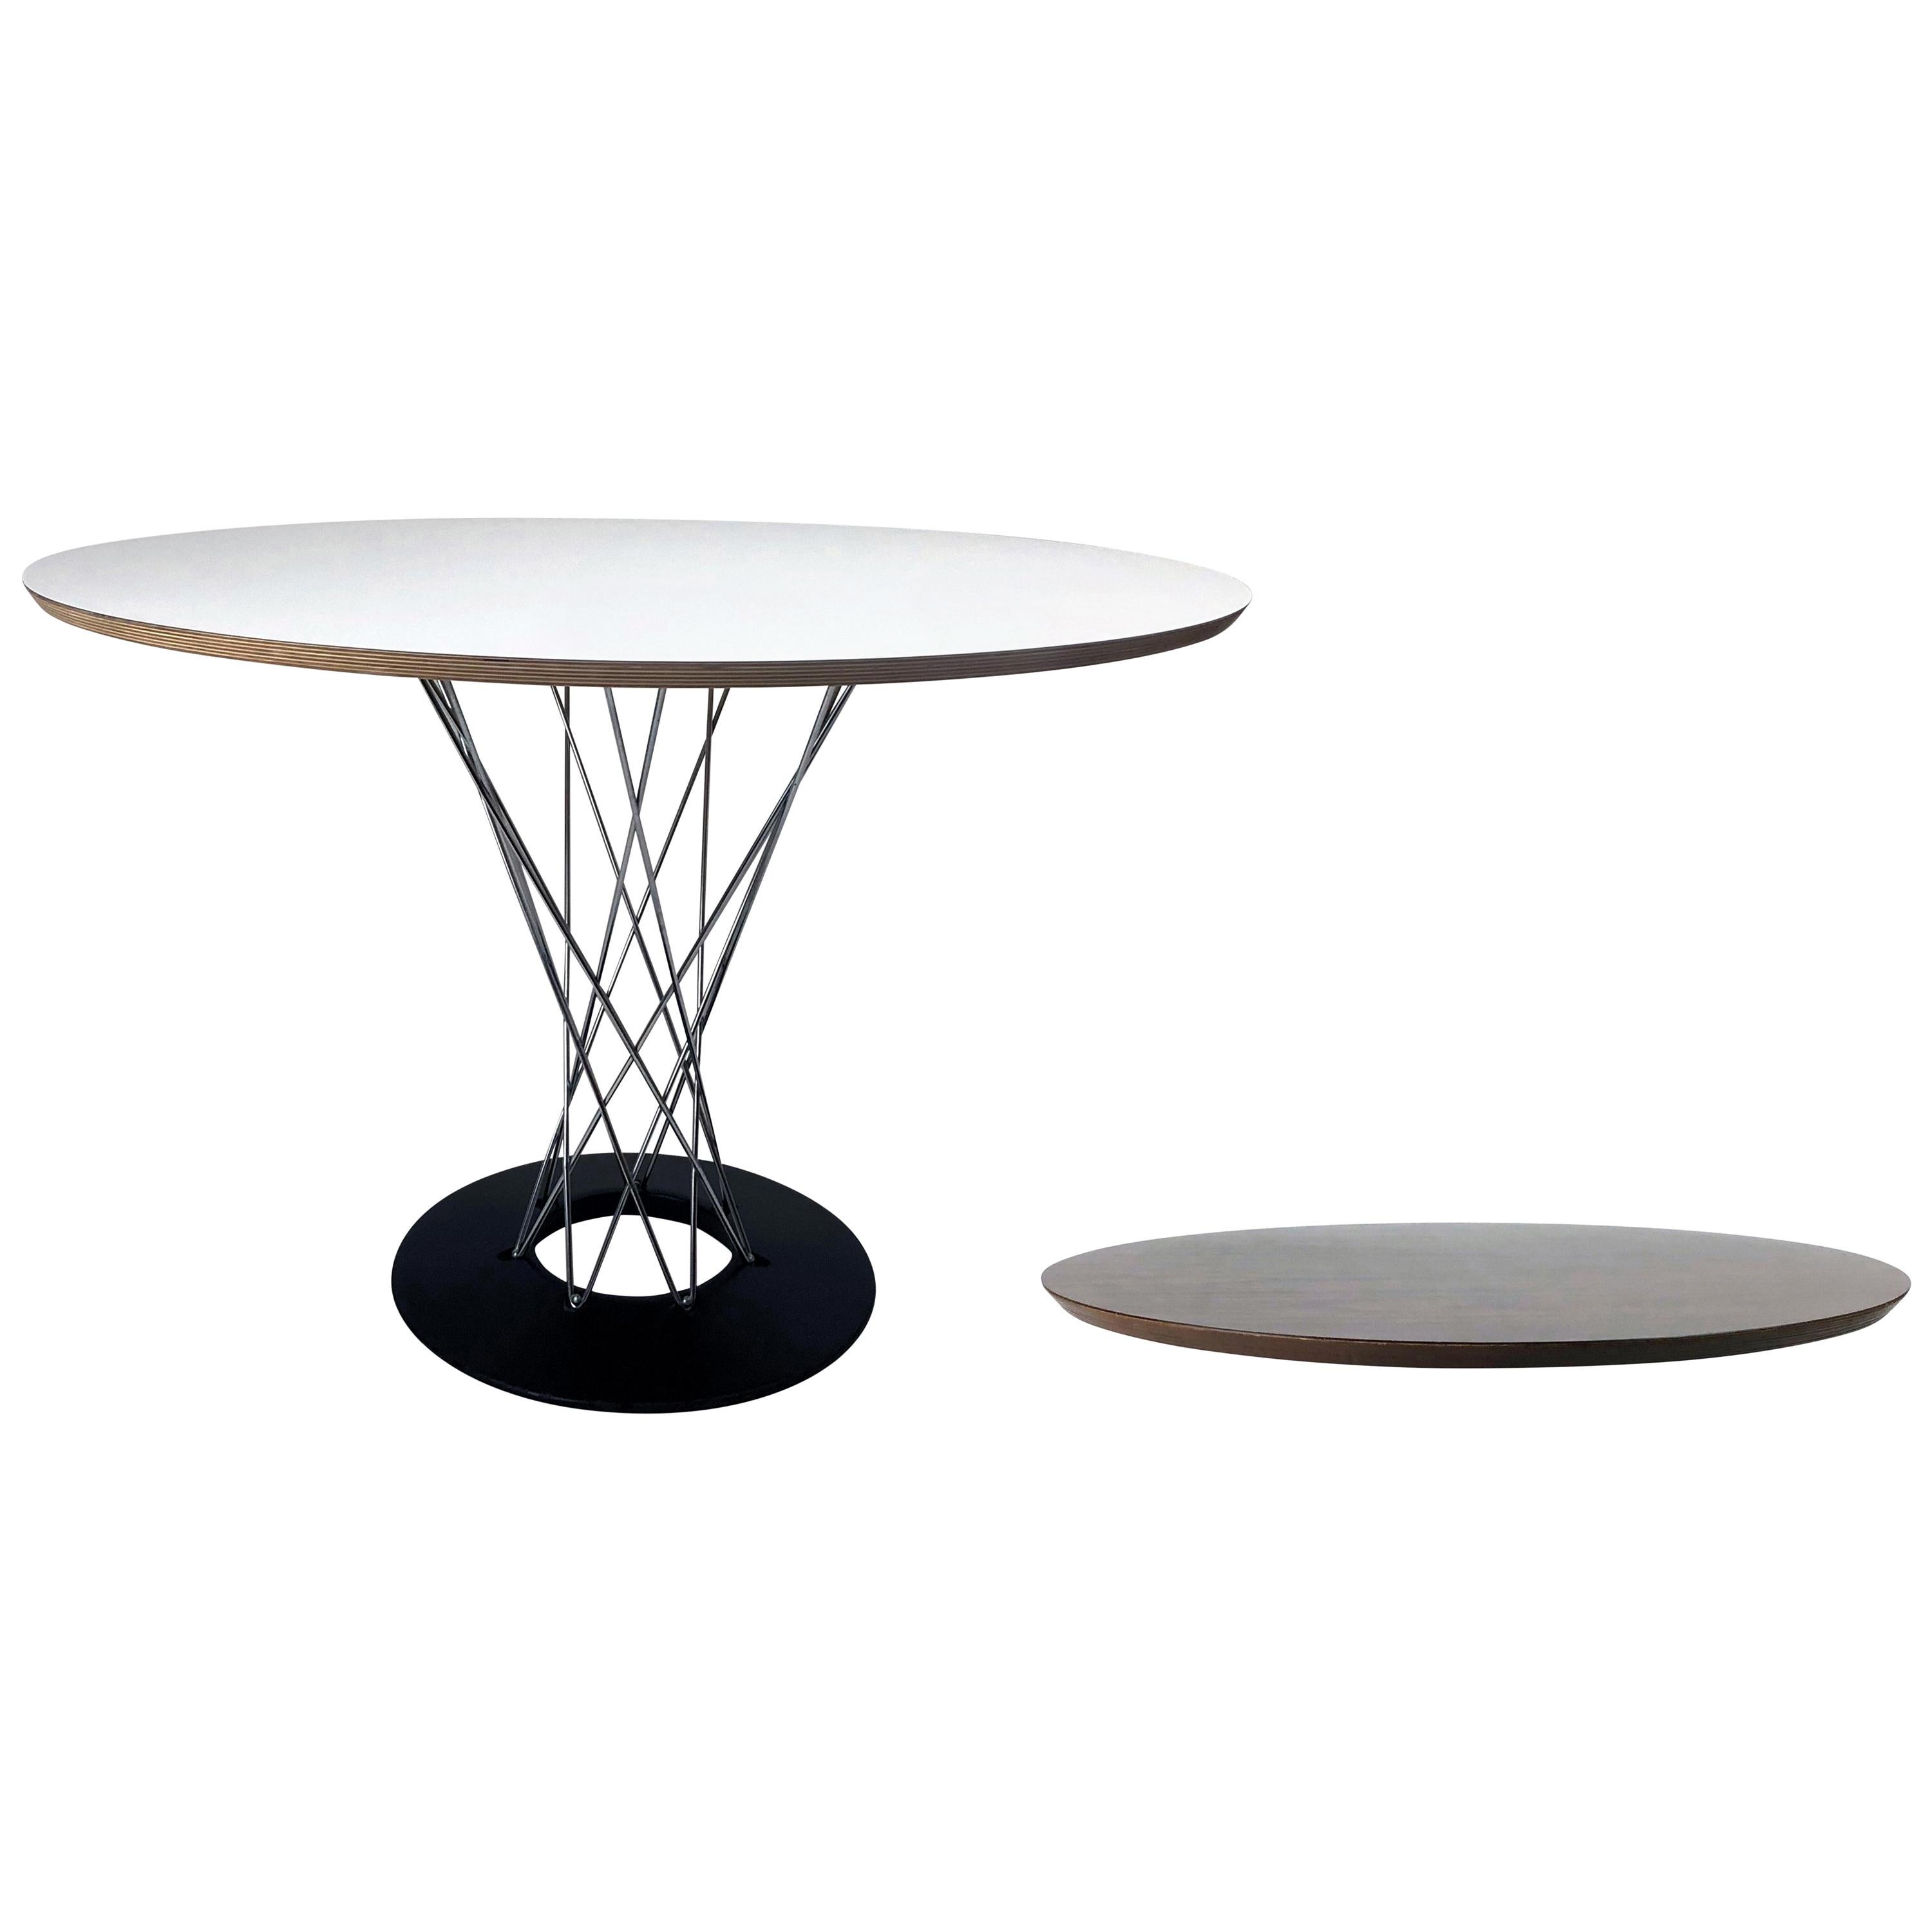 Cyclone Dining Table by Isamu Noguchi for Knoll